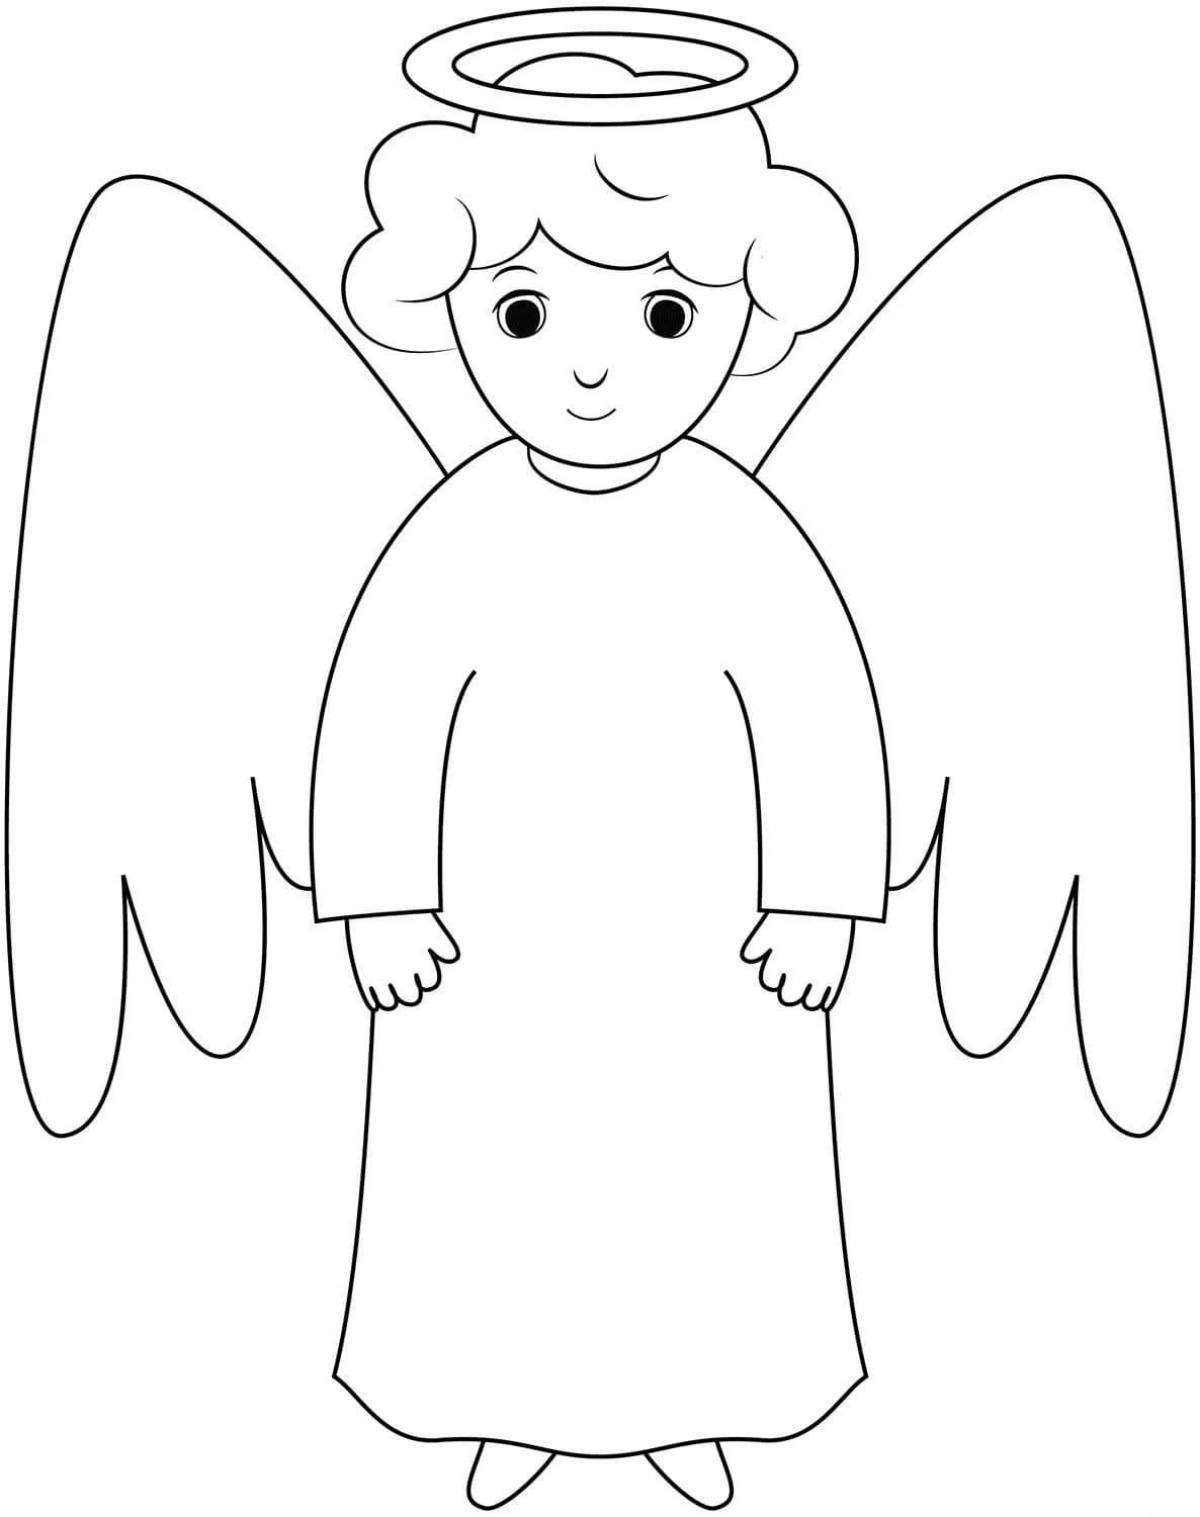 Adorable coloring book angel with wings for kids